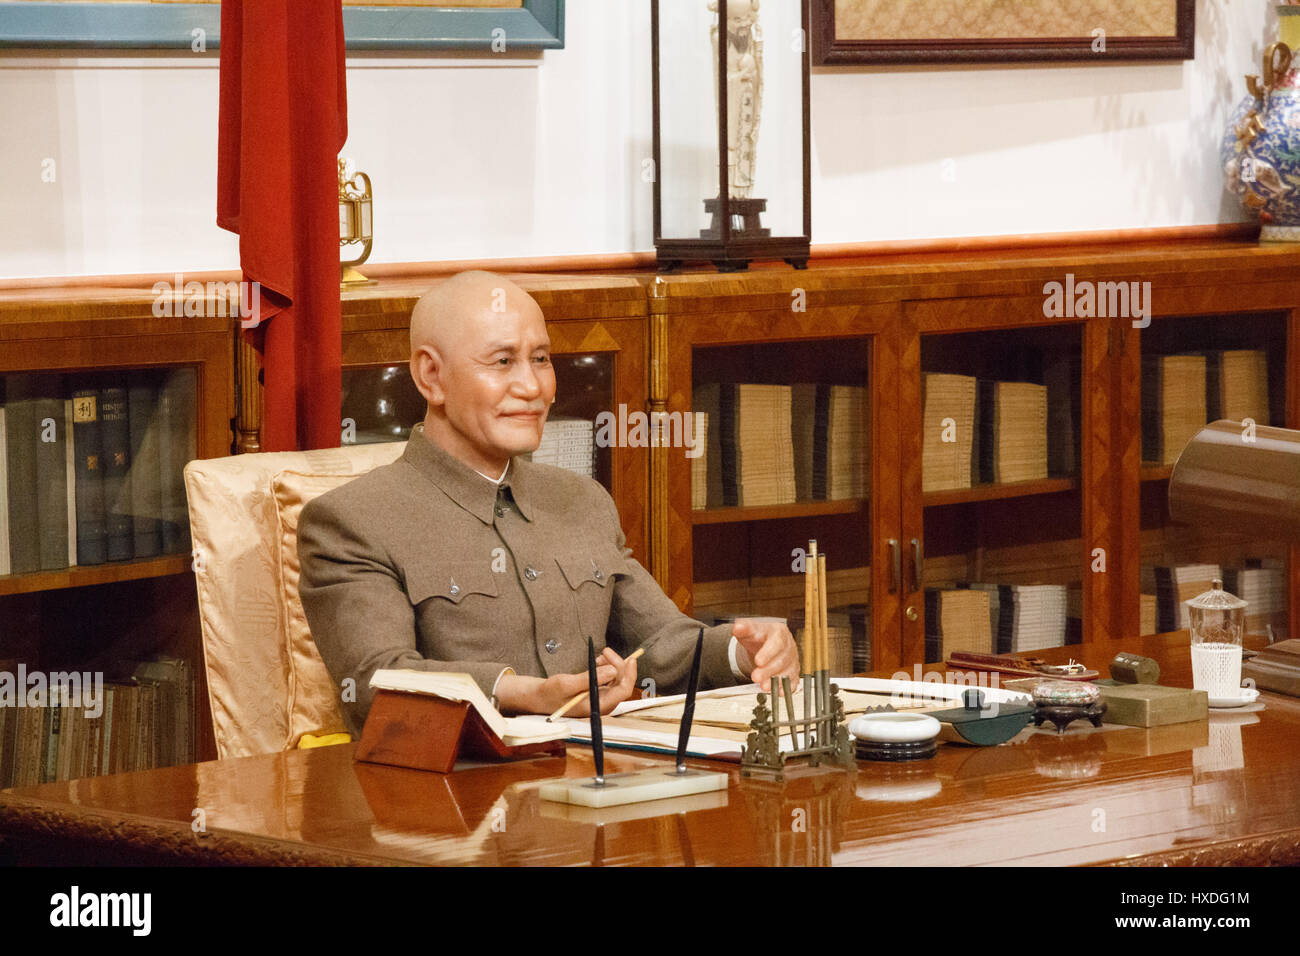 [Editorial Use Only] TAIWAN, TAIPEI CITY: Wax sculpture of President Chiang Kai-shek behind his desk Stock Photo